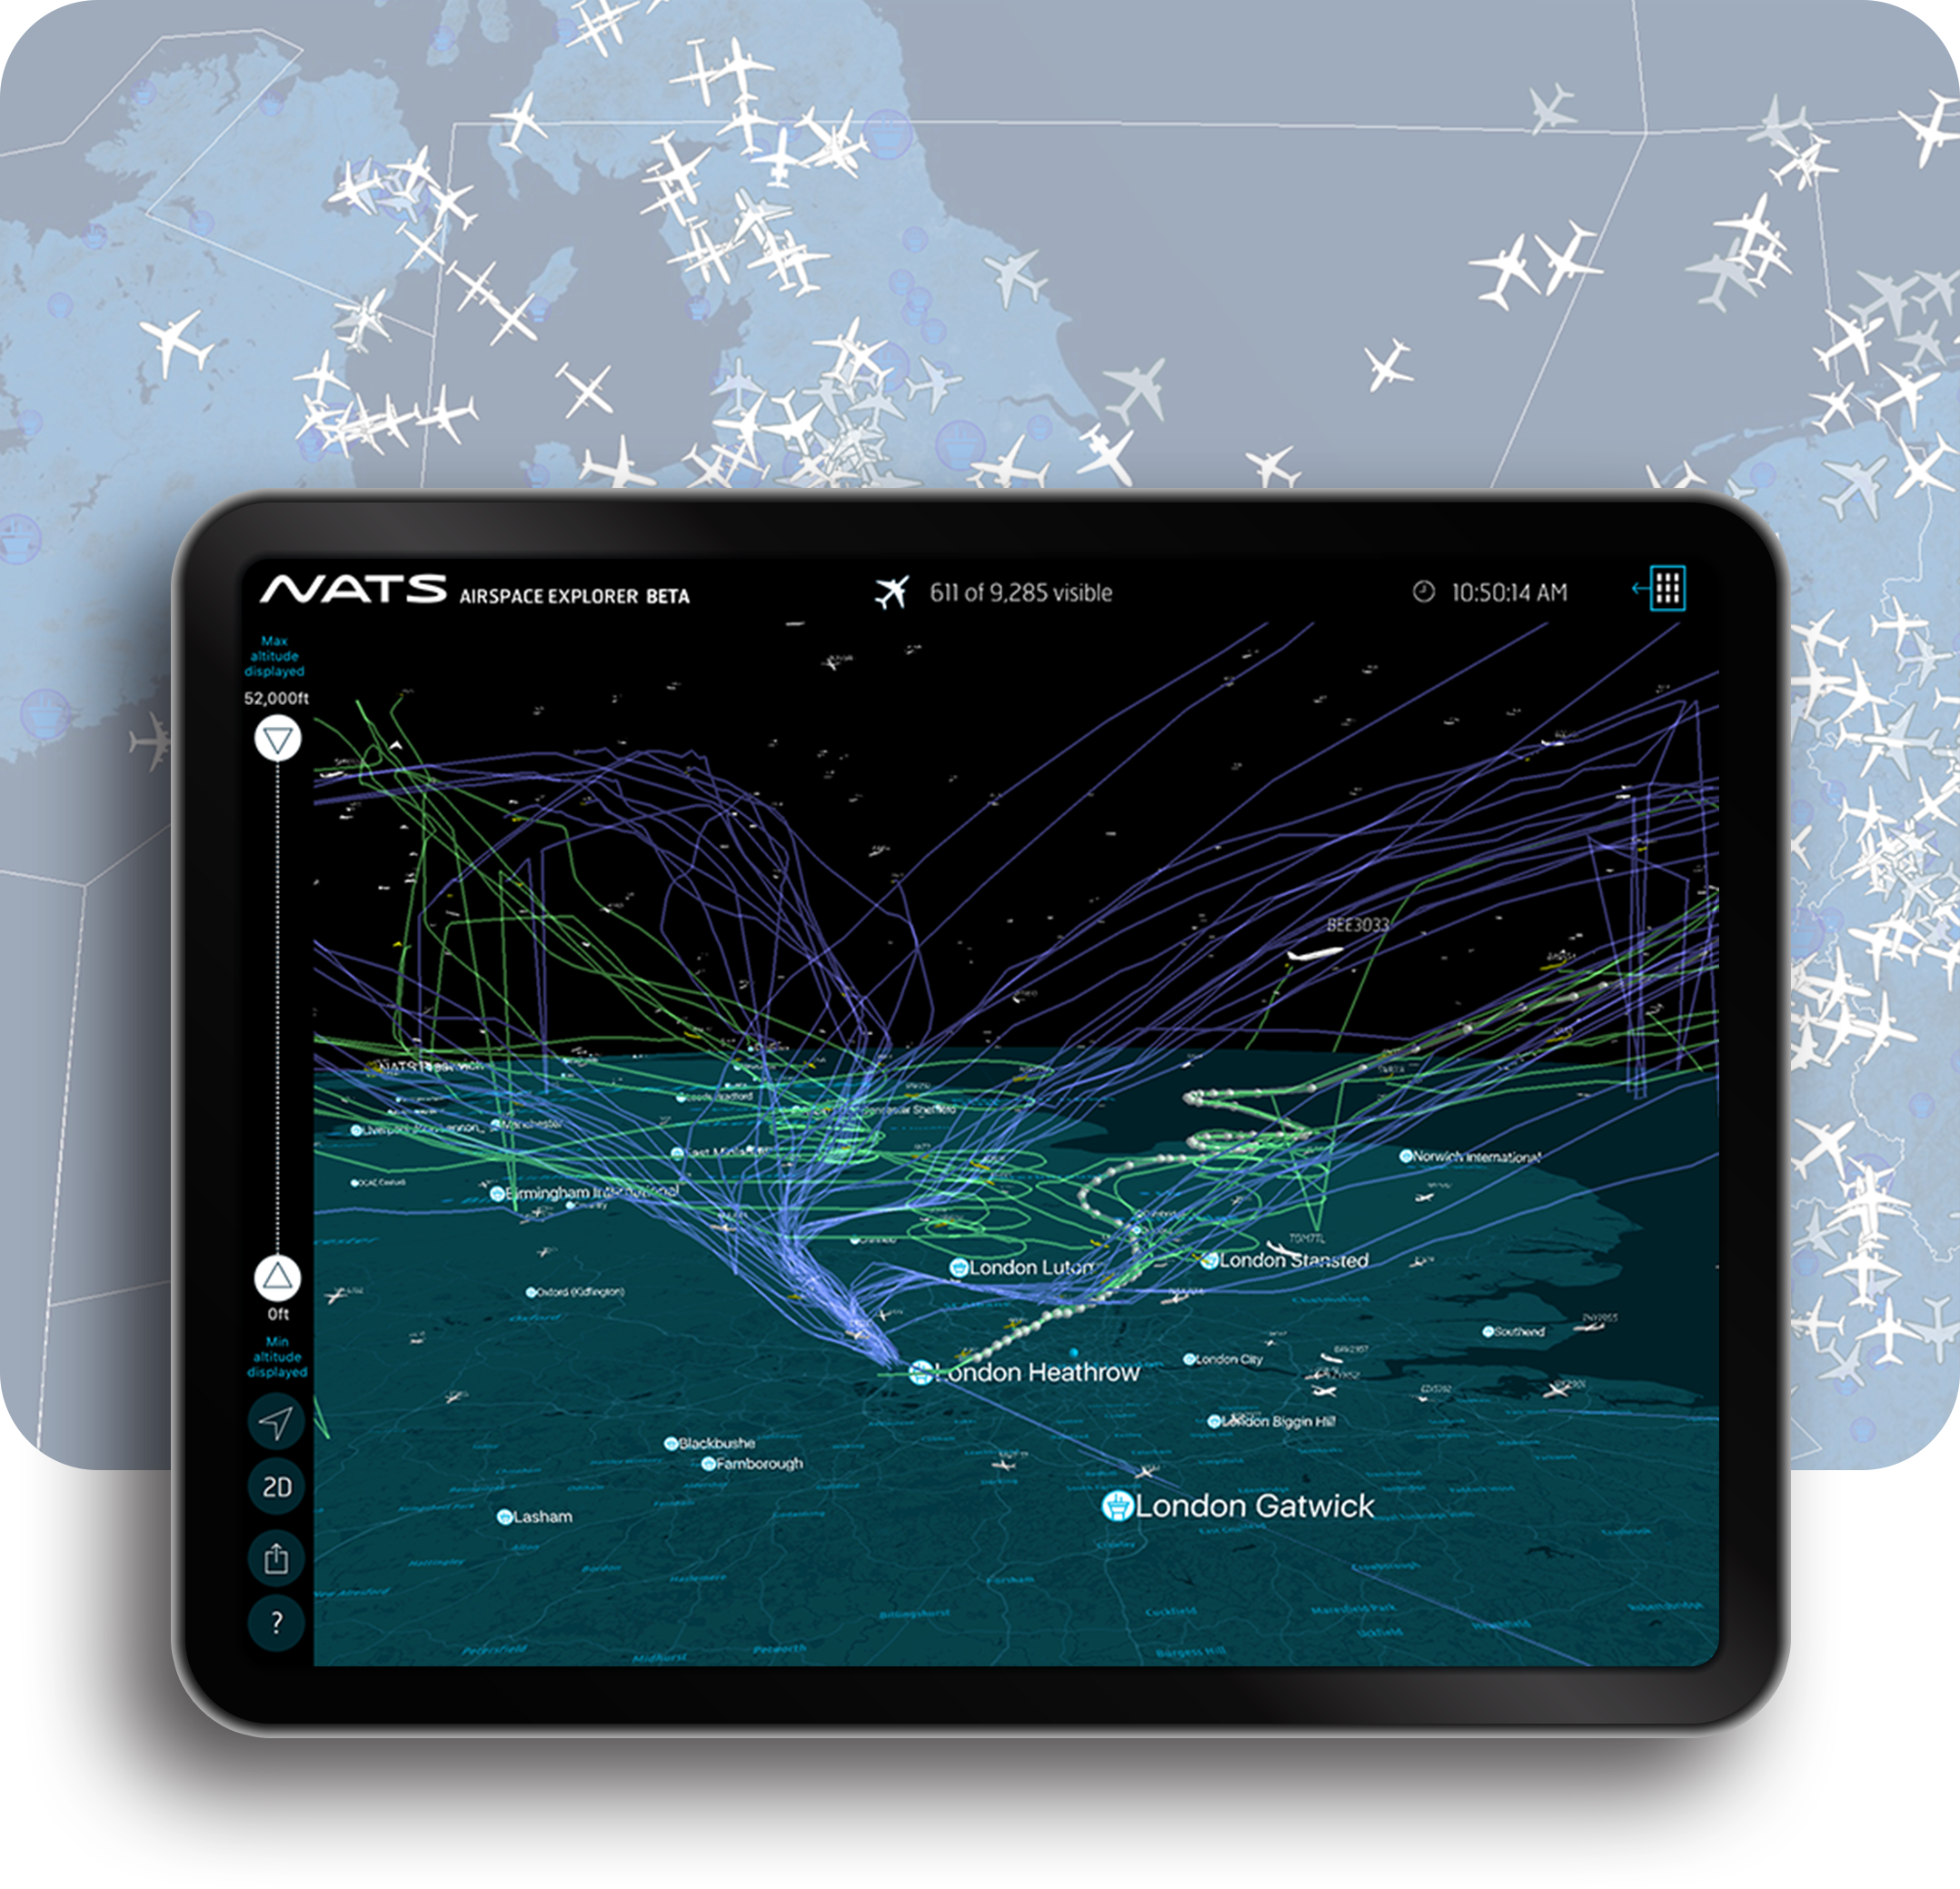 Composite image of weather app created for the National Air Traffic Control System of the UK. The bottom image is a map of northern Europe in blue, with flight patterns marked by airplane icons in white. Top image is a map of the UK showing airports as dots and flight patterns as lines, all in blues, greens, and purples. Top image sits within the frame of a tablet in landscape view.